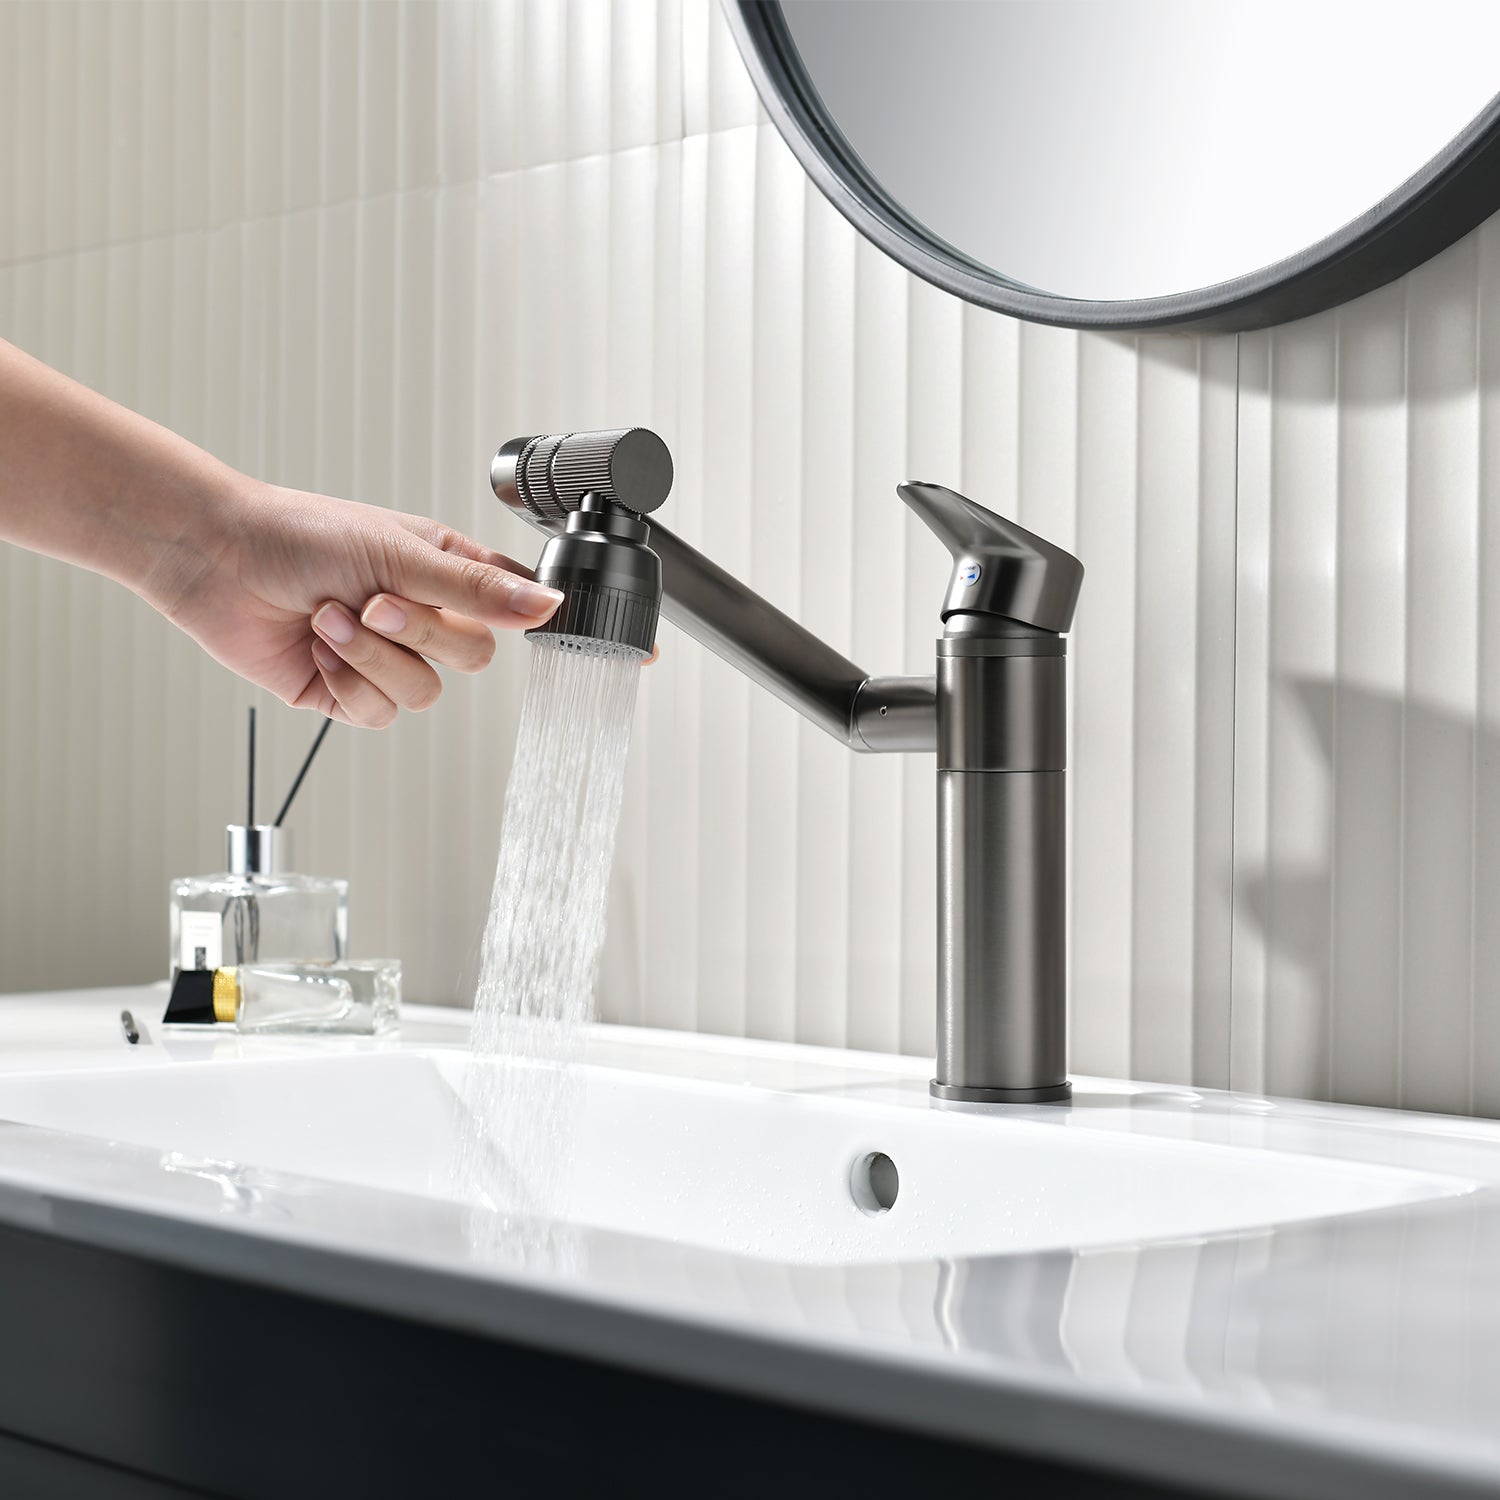 Lefton Single-Hole Rotatable Multi-Derectional Waterfall Faucet-BF2202